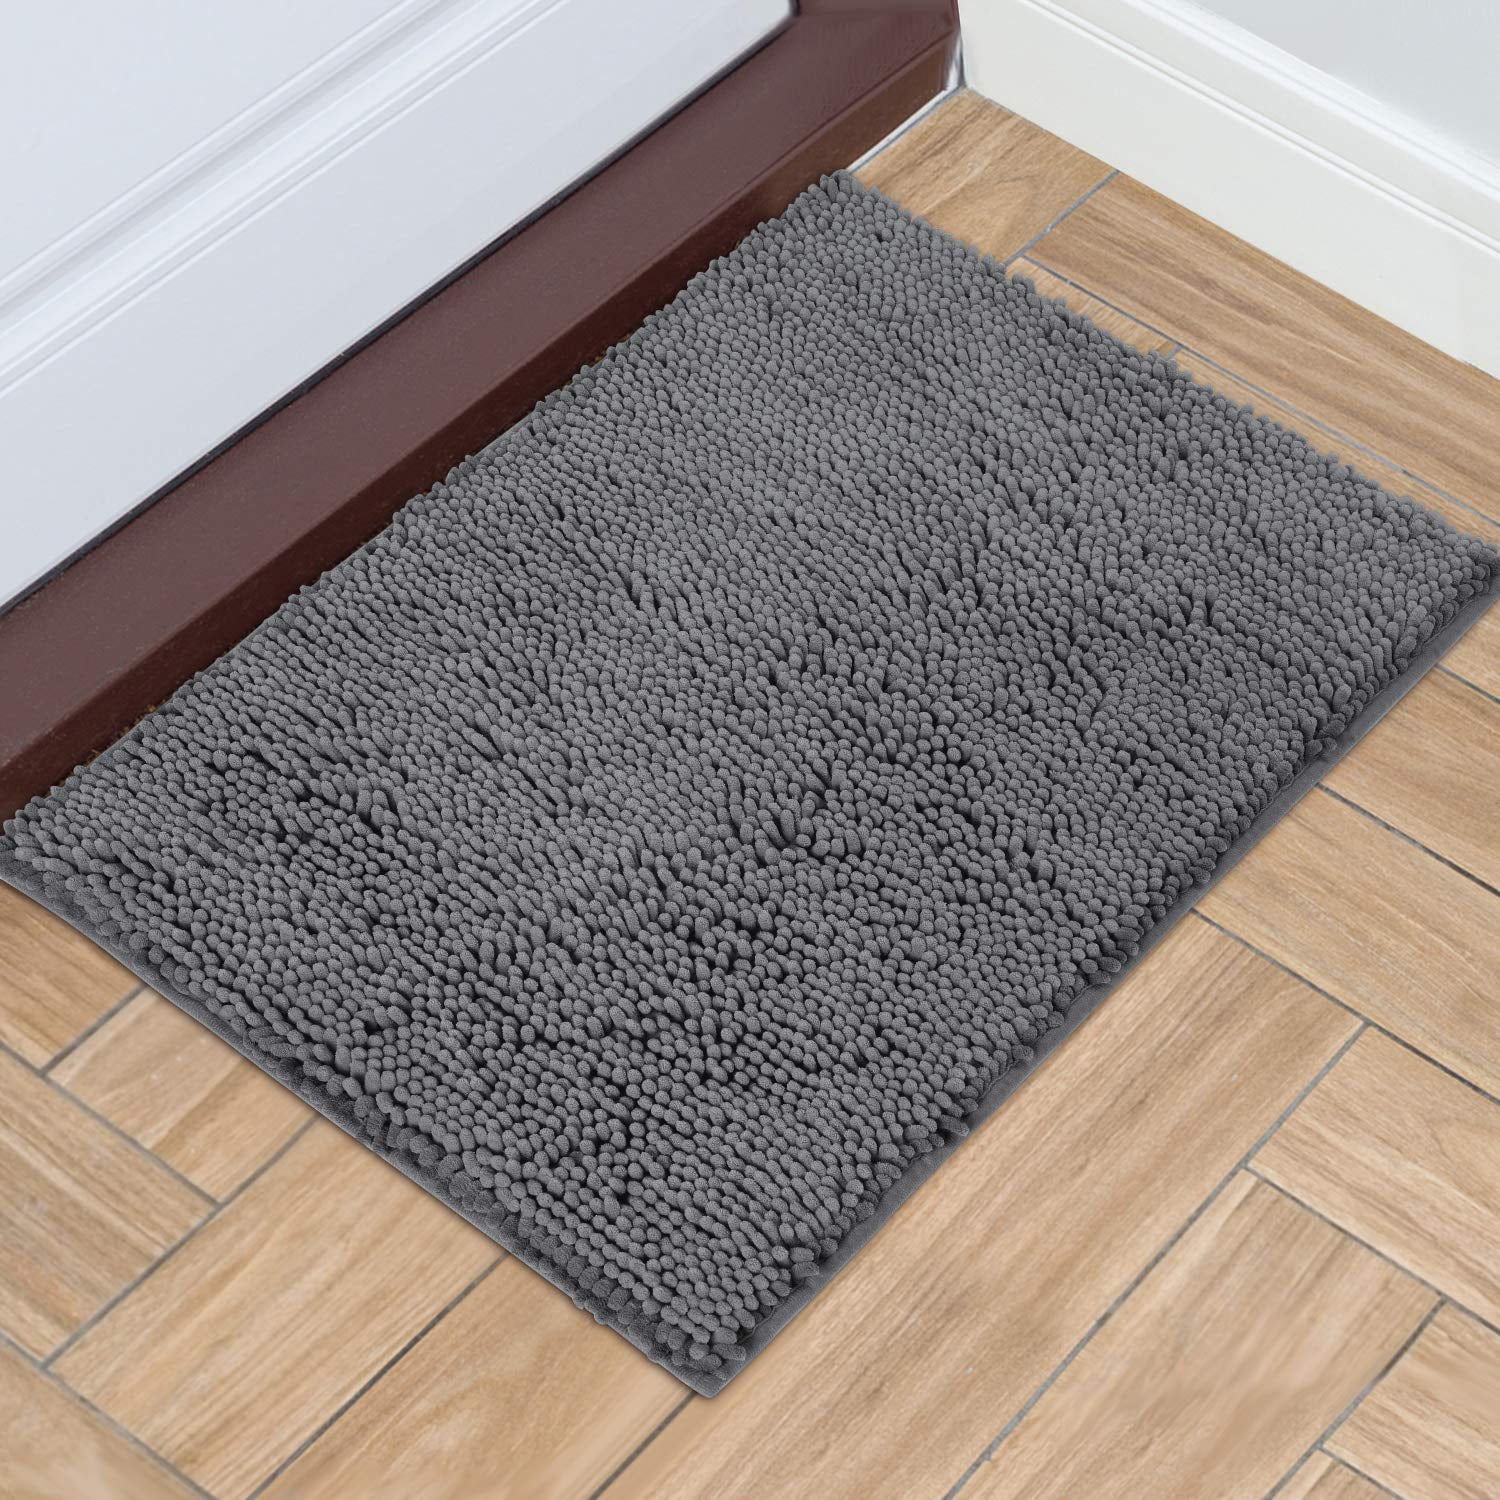 HOMEIDEAS Absorbent Chenille Door Mat Indoor, Low-Profile Rubber Backing  Rug for Entryway, Muddy Dog Paws Washable Welcome Front Doormats (24x36